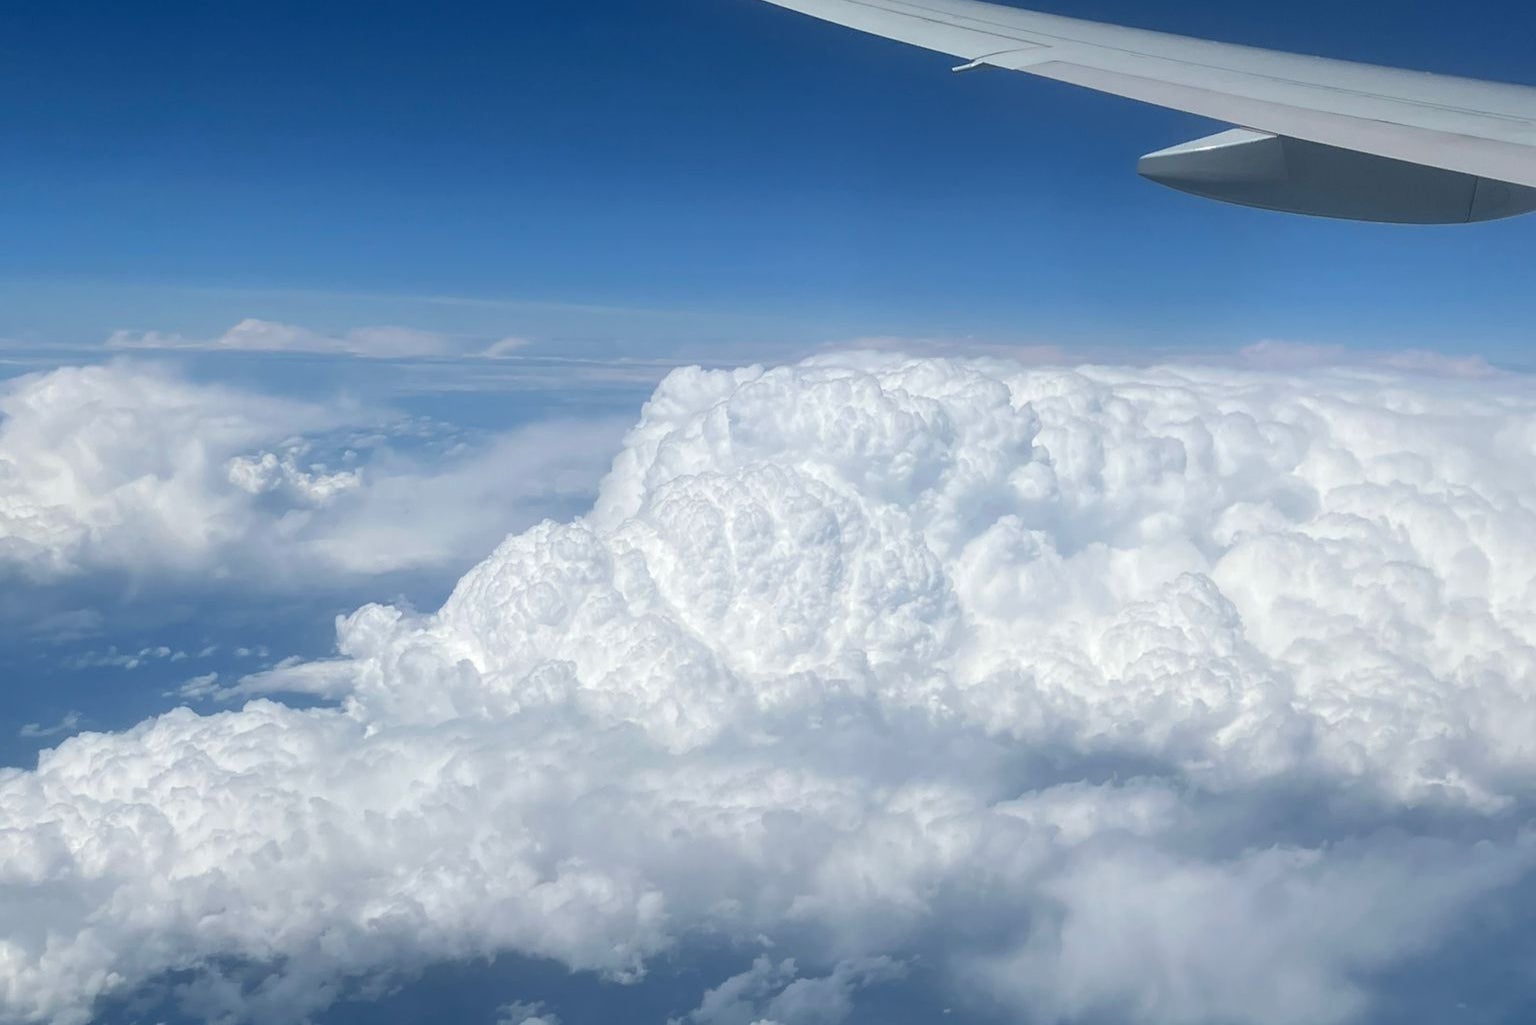 The final hours of the flight were spent musing over the physics of clouds and US infrastructure